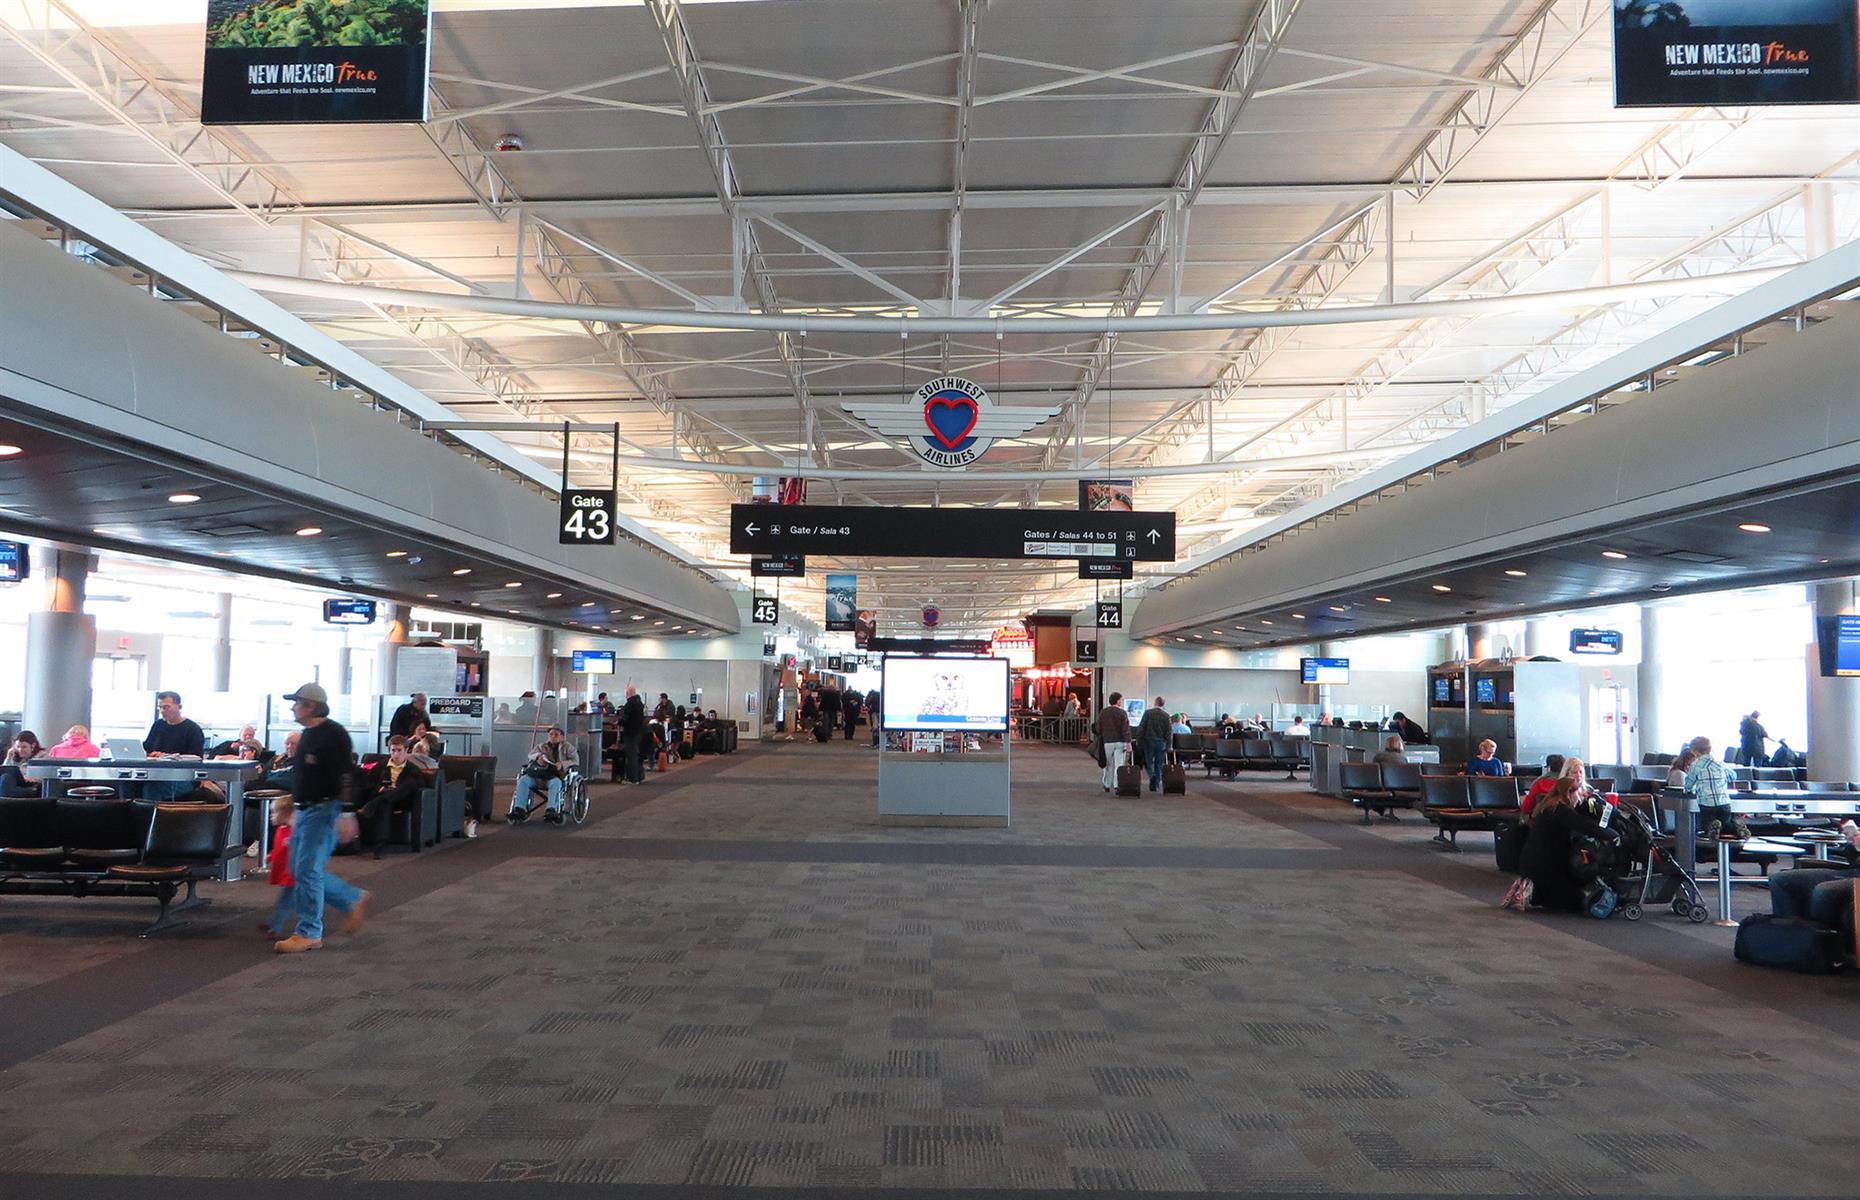 <p>Coming in fourth place with a score of 823 is William P. Hobby Airport, Houston's second-largest. Its first terminal, built in 1940 in Art Deco style, is now a museum, while its newer terminals have received praise from travelers for their cleanliness and efficiency.</p>